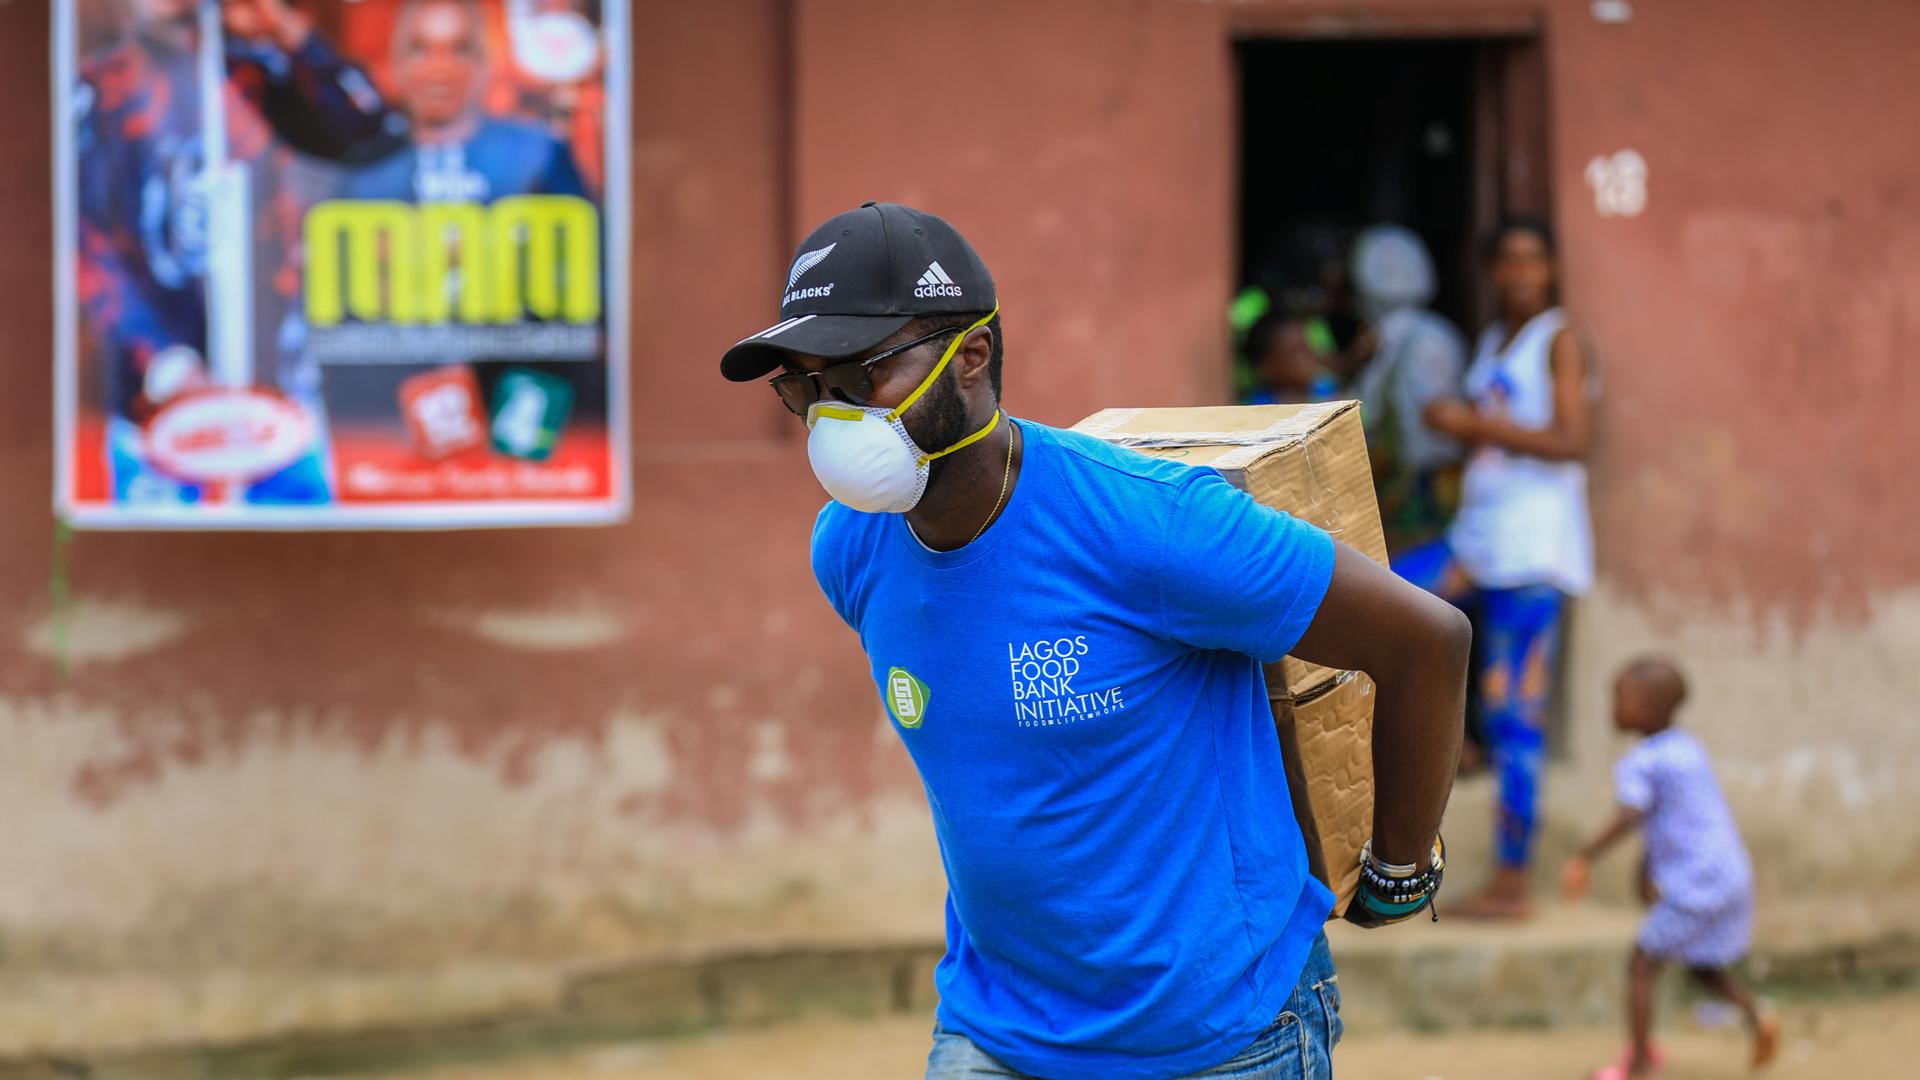 A man is shown wearing a blue shirt with "Lagos Food Bank" written on it while carrying a cardboard box on his back.